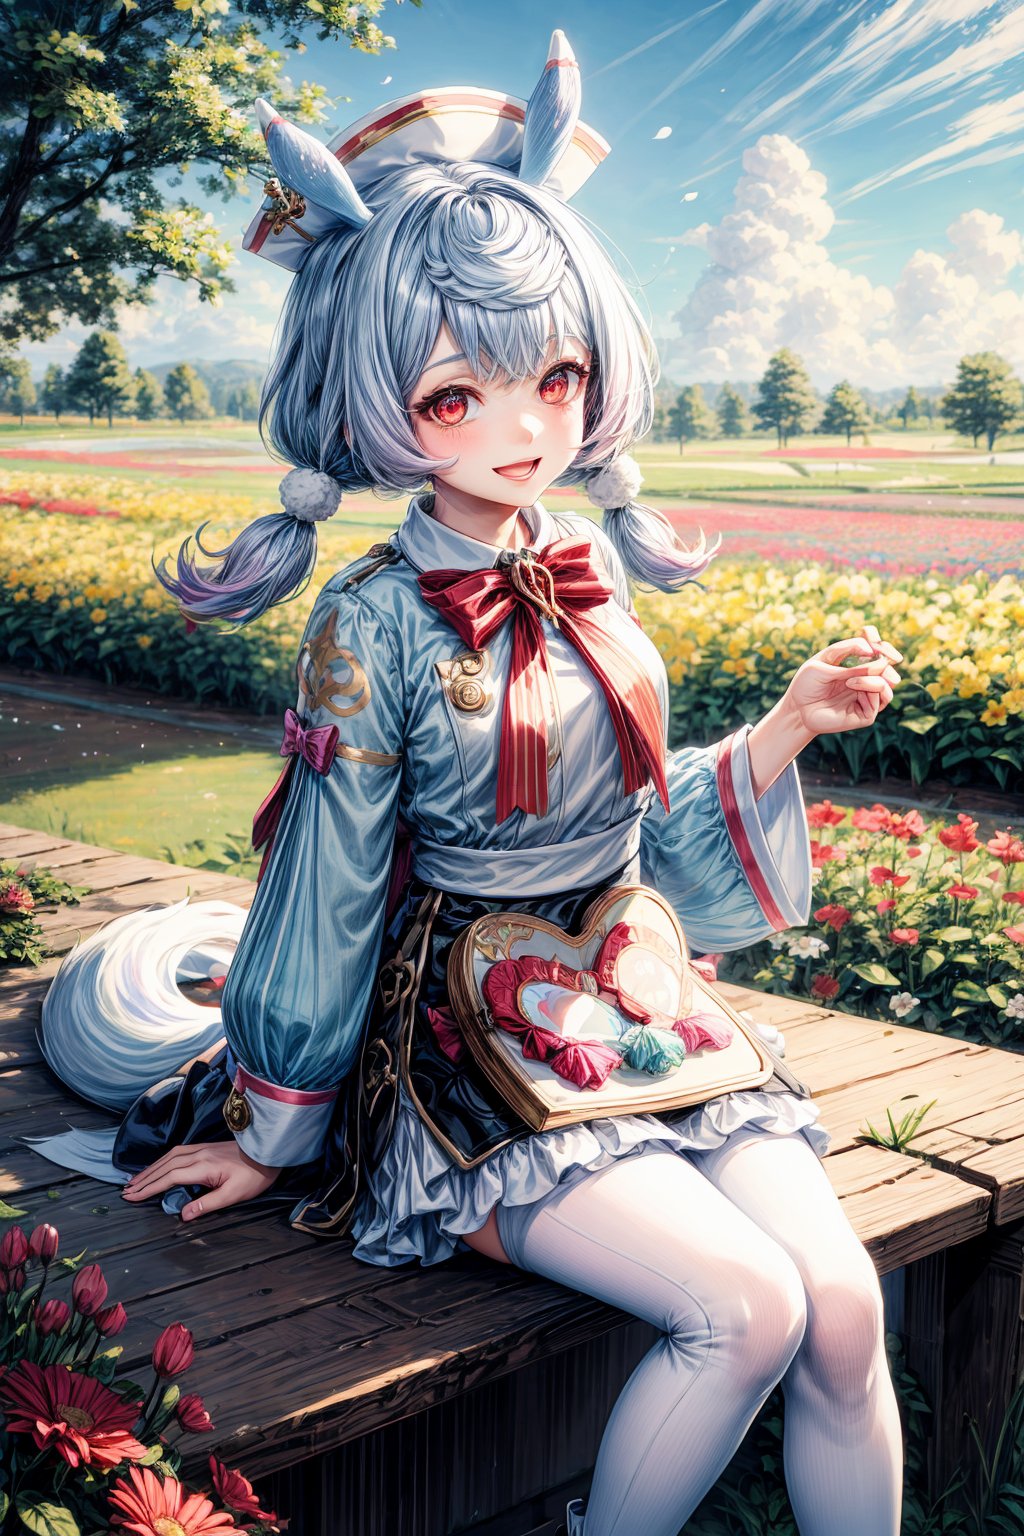 A solo vision of Sigewinne from Genshin Impact, framed in a bright and airy outdoor setting amidst blooming flower fields. She stands with a beaming happy face, wearing a stunning dress adorned with pom poms and twintails tied up with red bows and matching white headwear featuring animal ears. A white apron drapes down her front, paired with white pantyhose and a bowtie at the neck. Her blue hair is styled with a fluffy pom pom hair ornament, and she holds a heart-shaped satchel in one hand while wearing knee-high boots. The focus is on Sigewinne's radiant smile as her red eyes shine bright, surrounded by the vibrant colors of the flower fields.